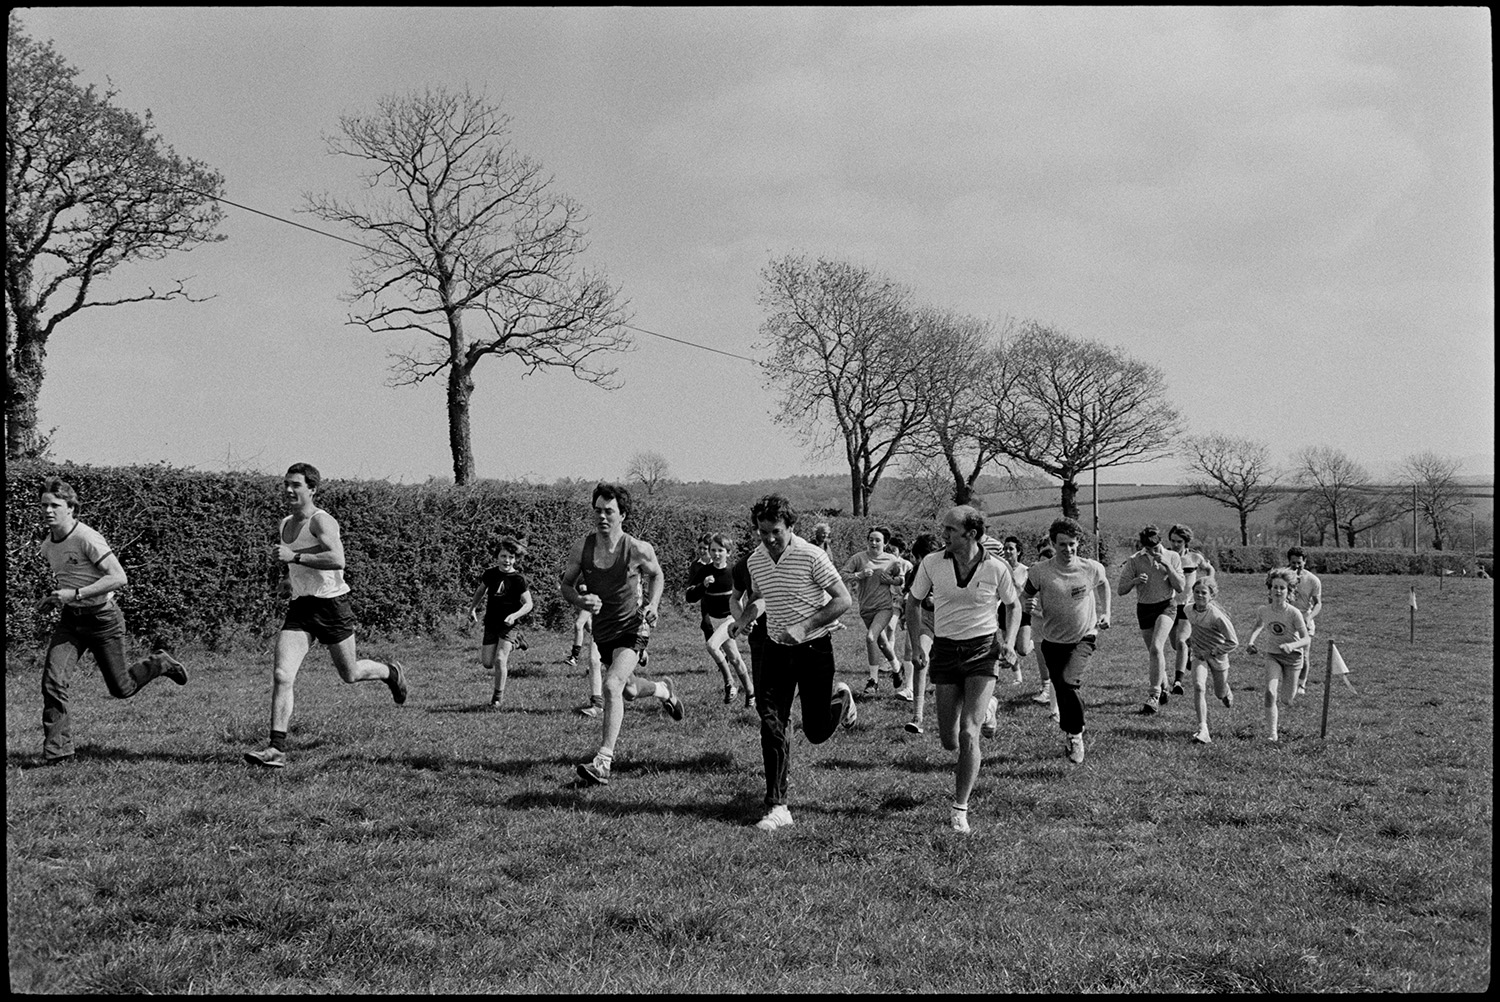 Club Day. Sports, running races, wellie throwing, prizes being given out.
[Runners, including men and children, taking part in a race in a field at Iddesleigh Club Day.]